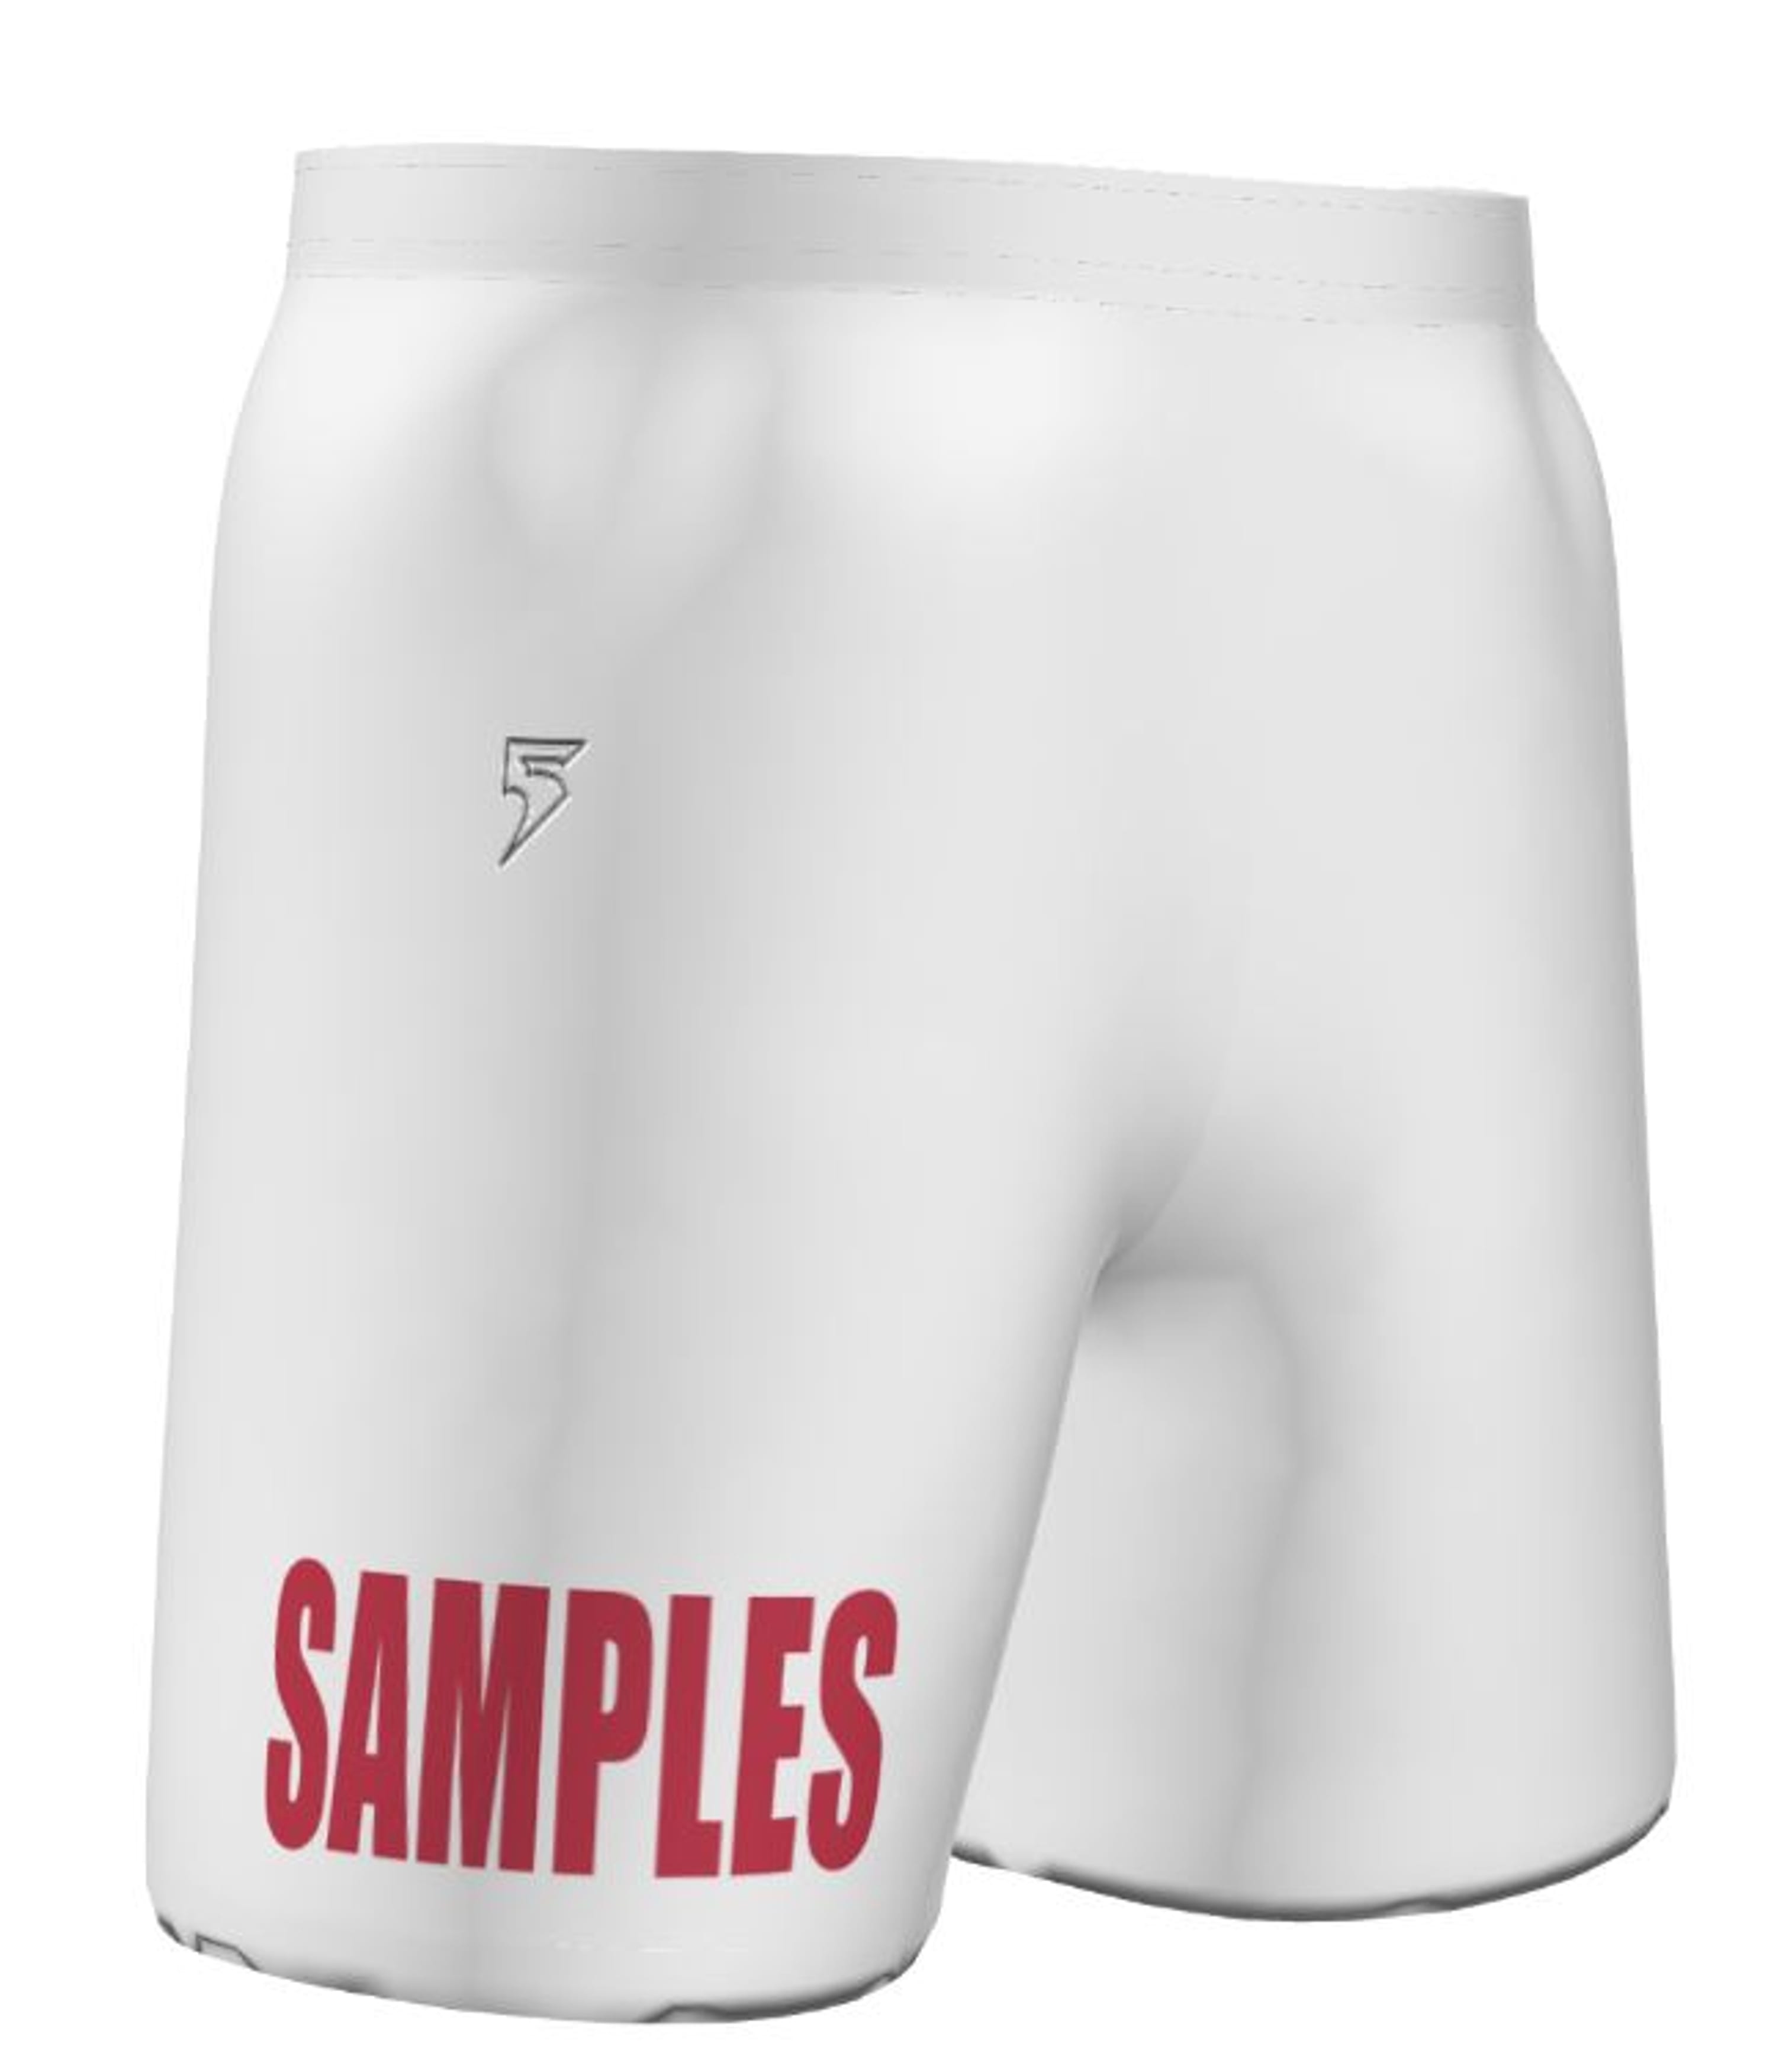 High Five CUT_321560  FreeStyle Sublimated Elite 7-inch Soccer Shorts